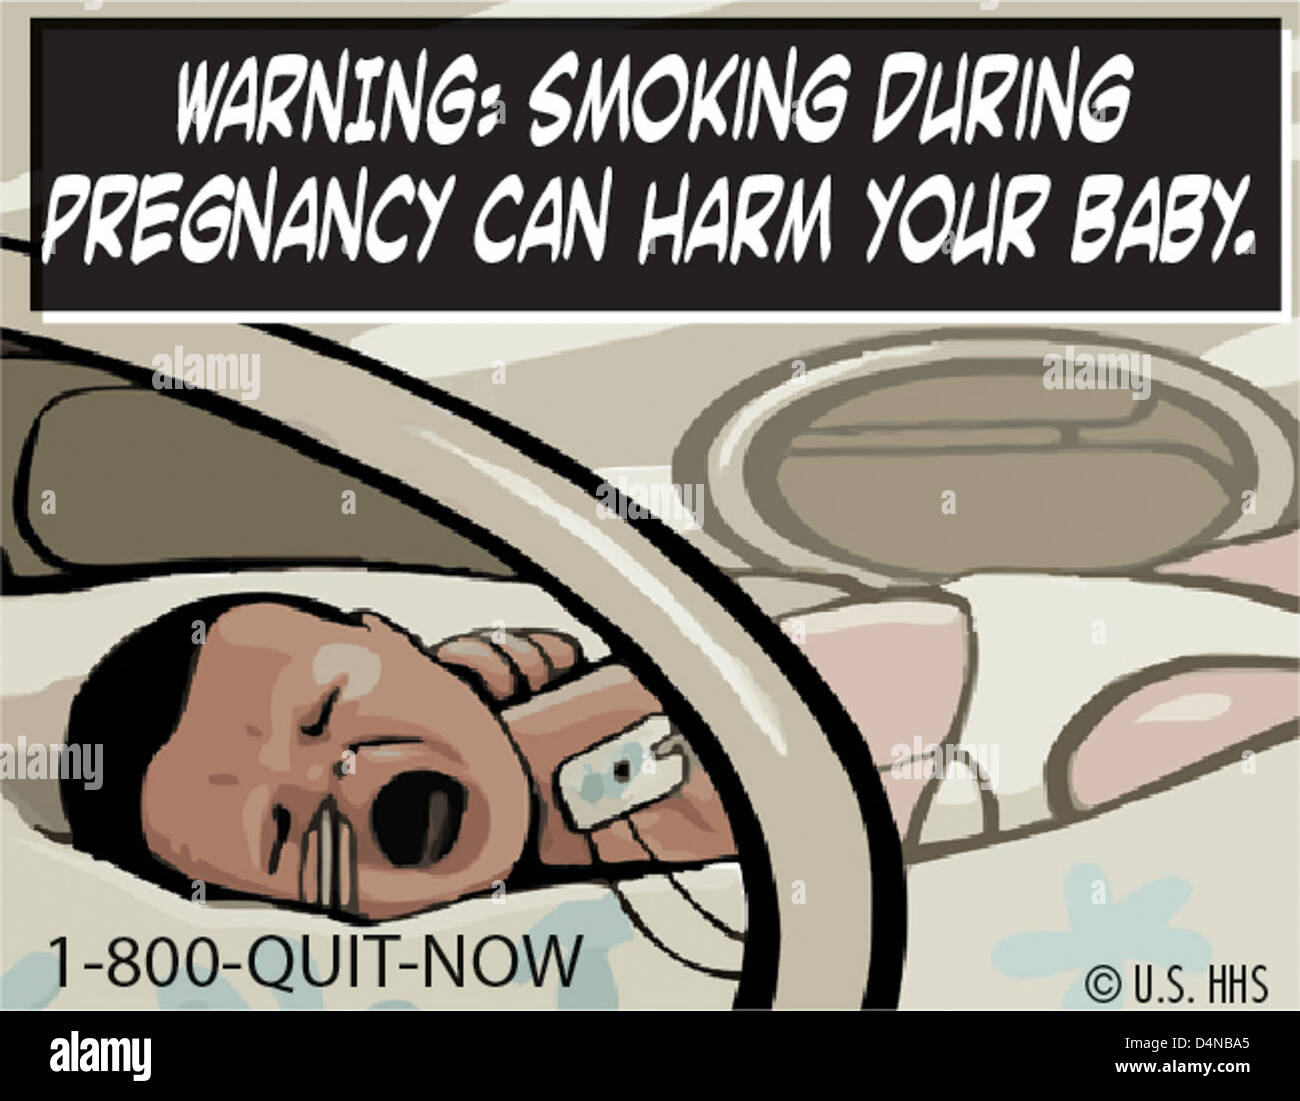 Cigarette Health Warning Images Stock Photo